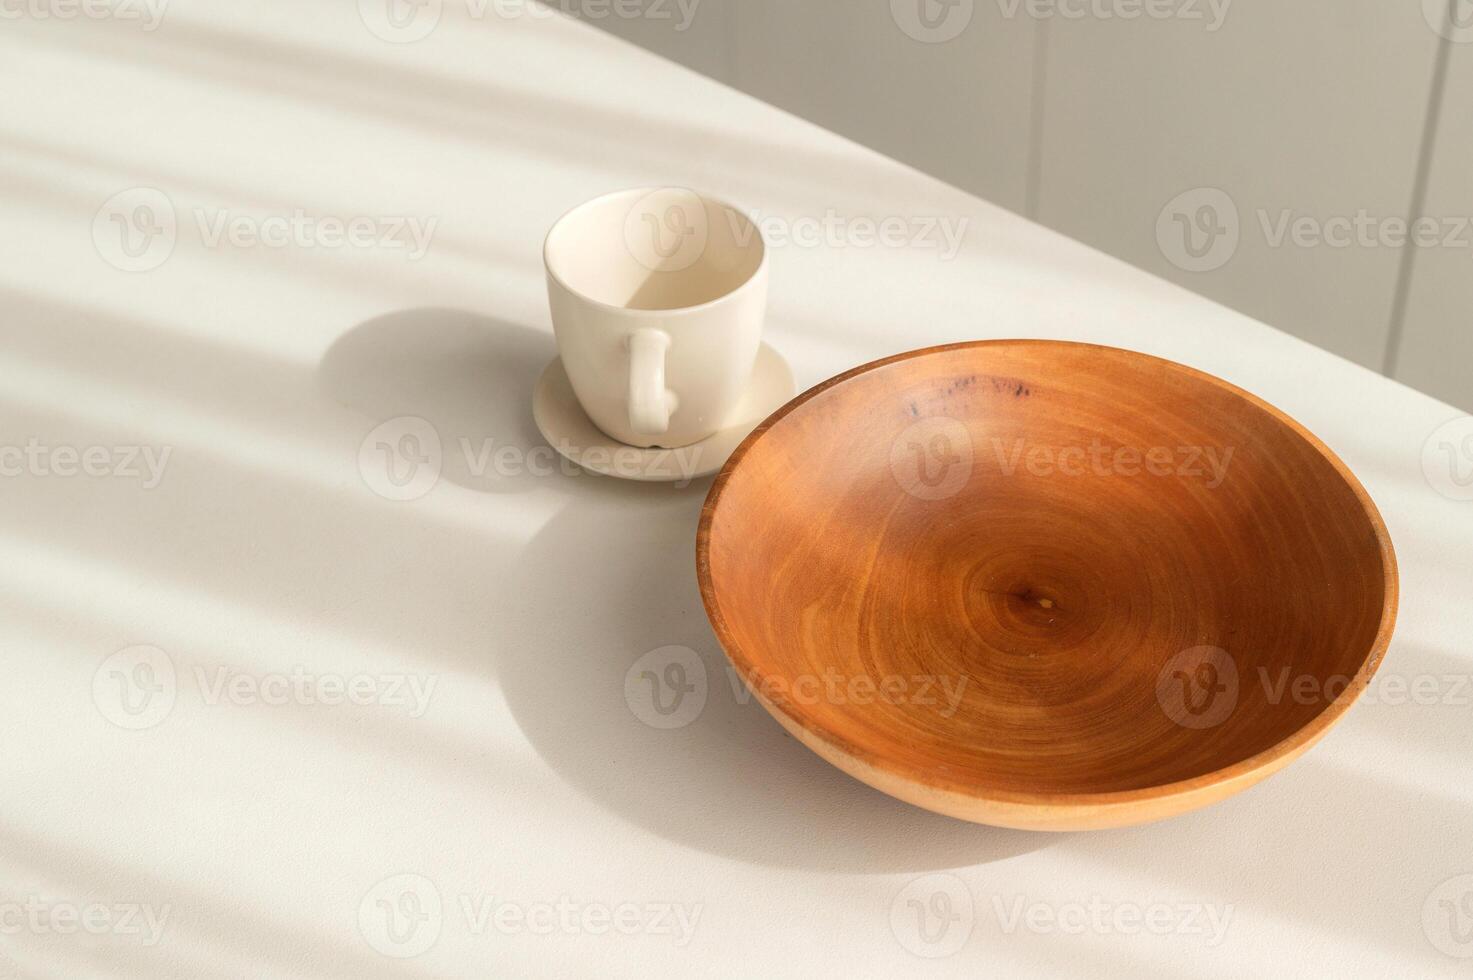 Step into elegant and clean kitchen with vintage charm. Simple and bright, round wooden tableware and utensils create still life of simplicity. hand made coffee cup and bowl. photo